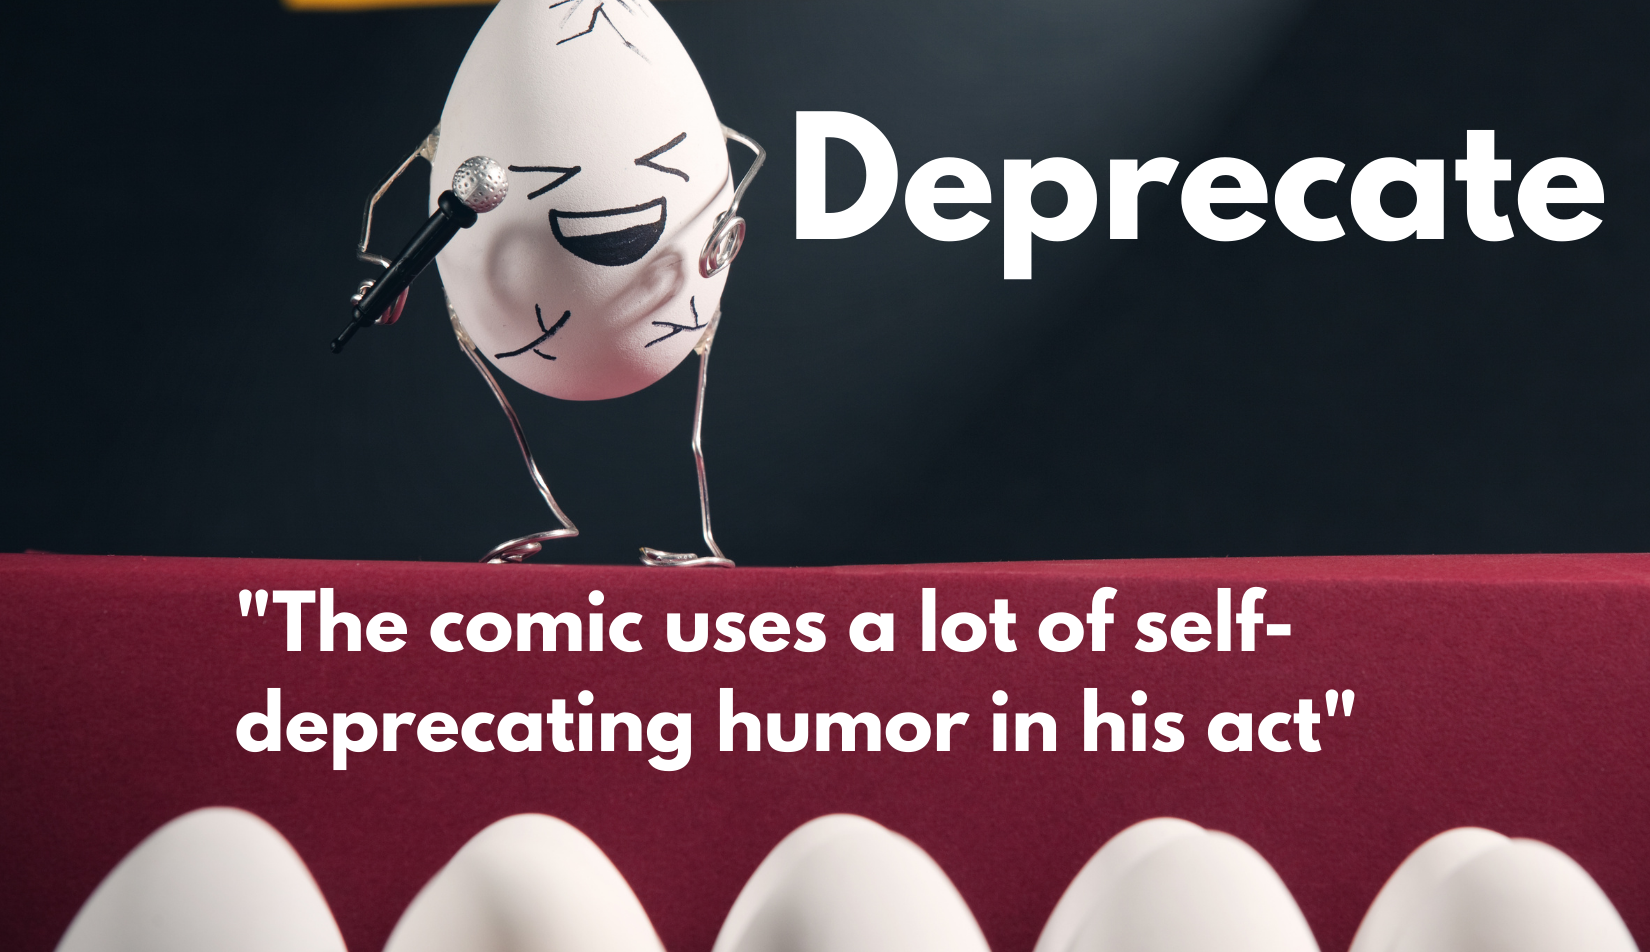 A graphic showing an egg with cracks doing a stand-up comedy routine for an audience of eggs with the caption "Deprecate" and the example phrase: "The comic uses a lot of self-deprecating humour in his act"